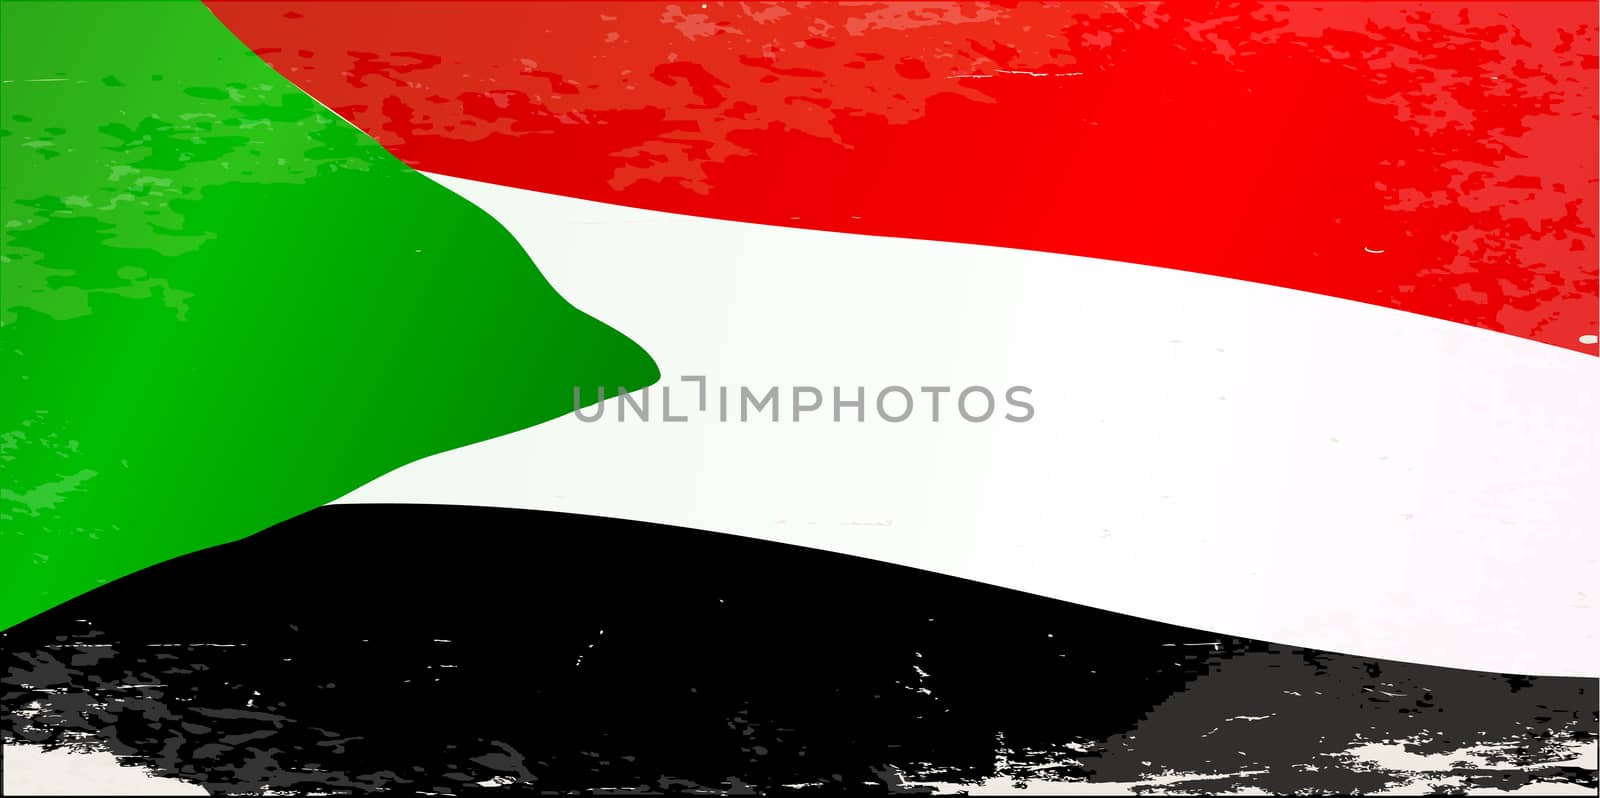 The flag of the African country Sudan